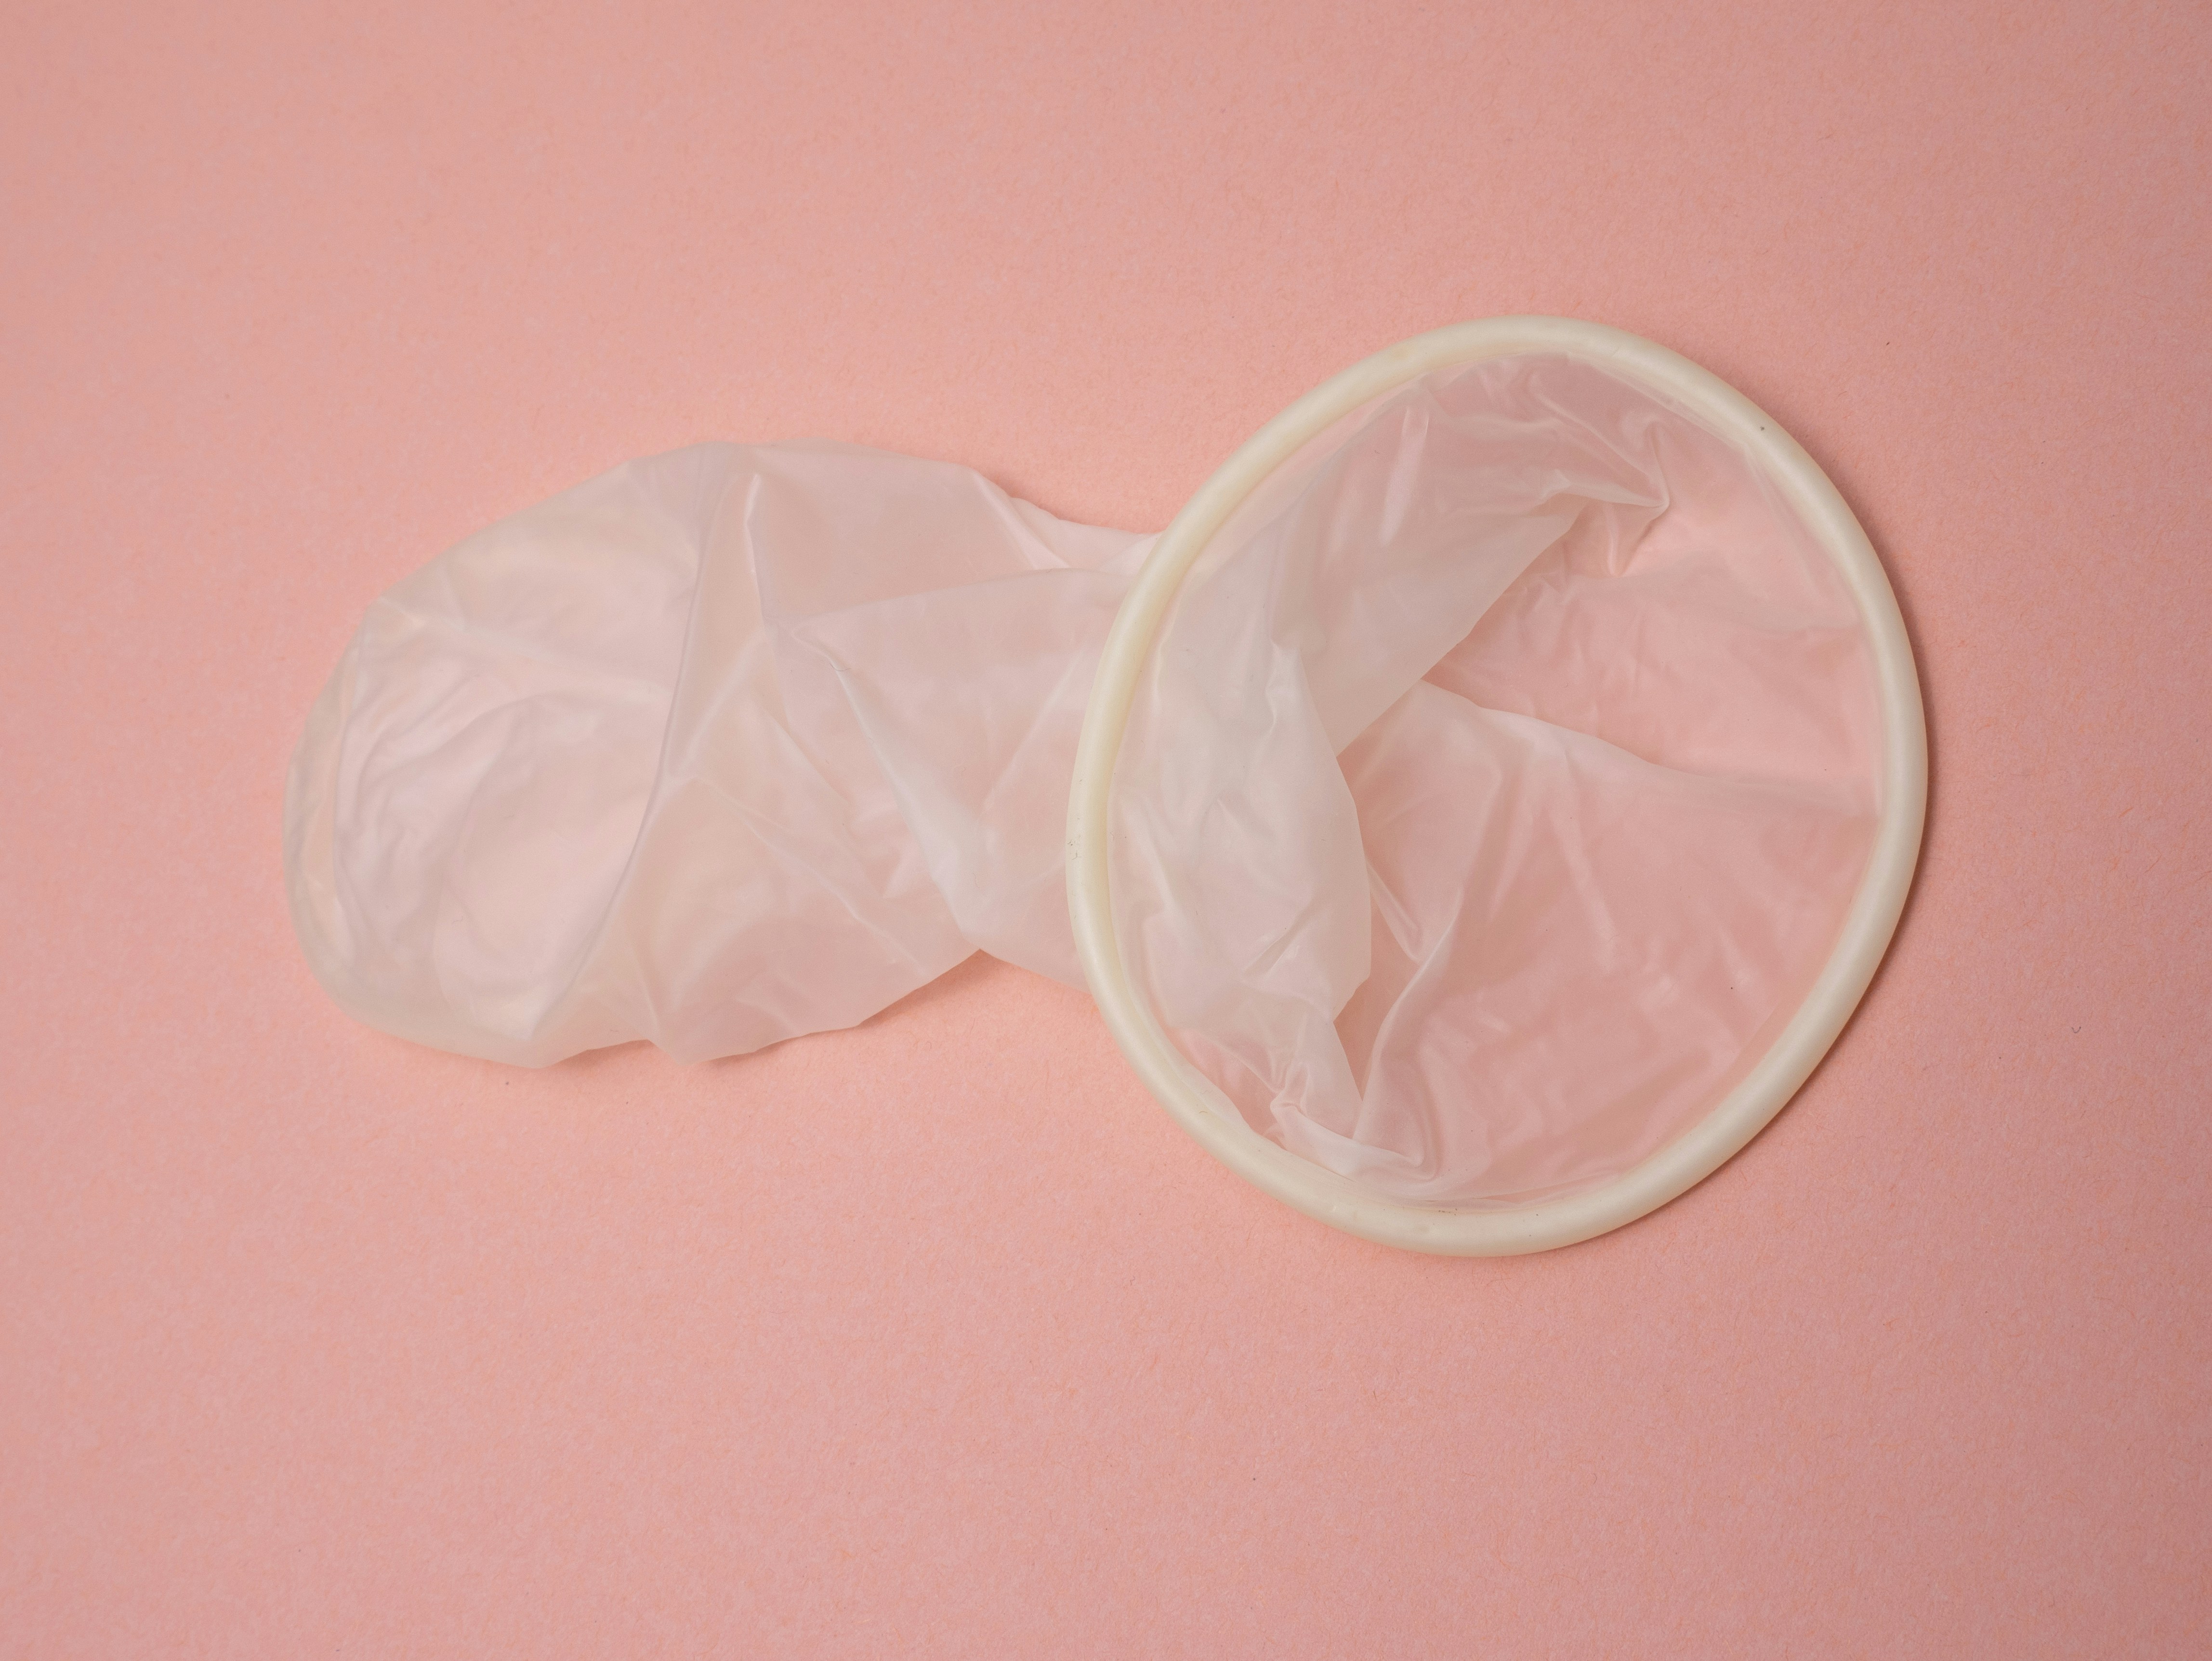 Female condom with the packaging